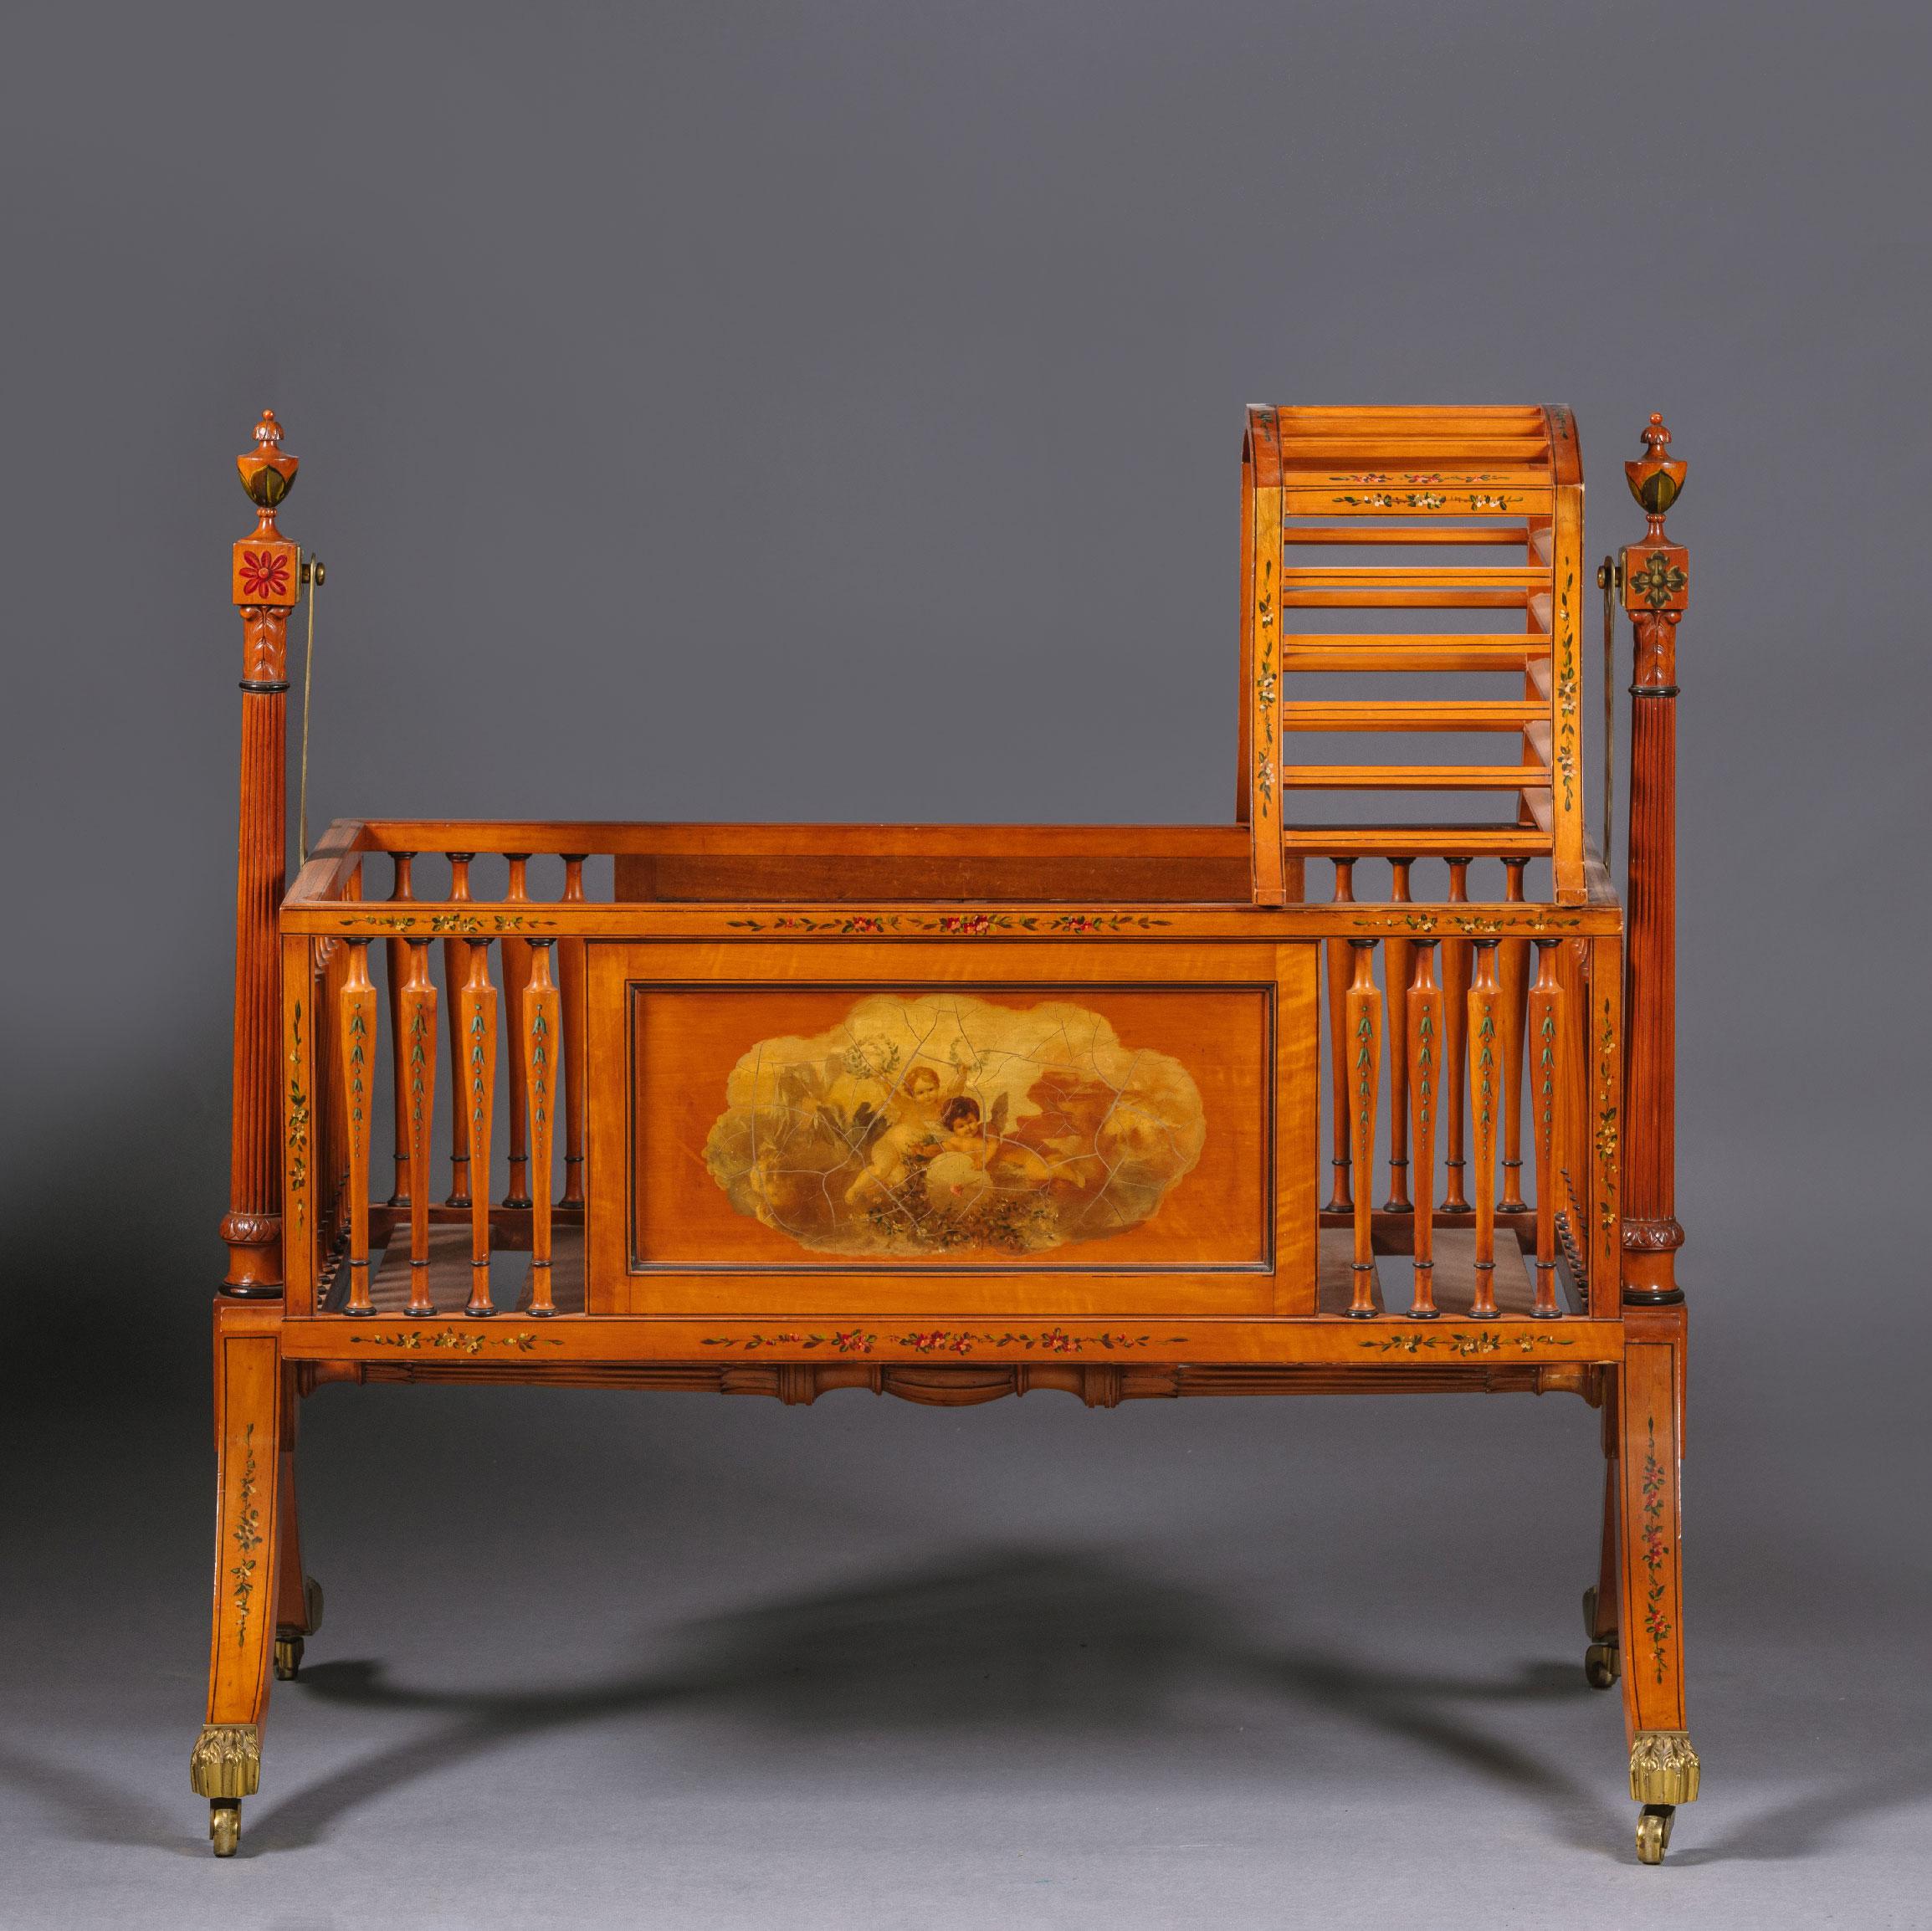 A late Victorian polychrome-decorated satinwood crib. After a Design by Thomas Sheraton. 

Made from precious satinwood decorated with polychrome painted flowers and husk trails. The front and back with 'vernis Martin' scenes of cherubs. The hood